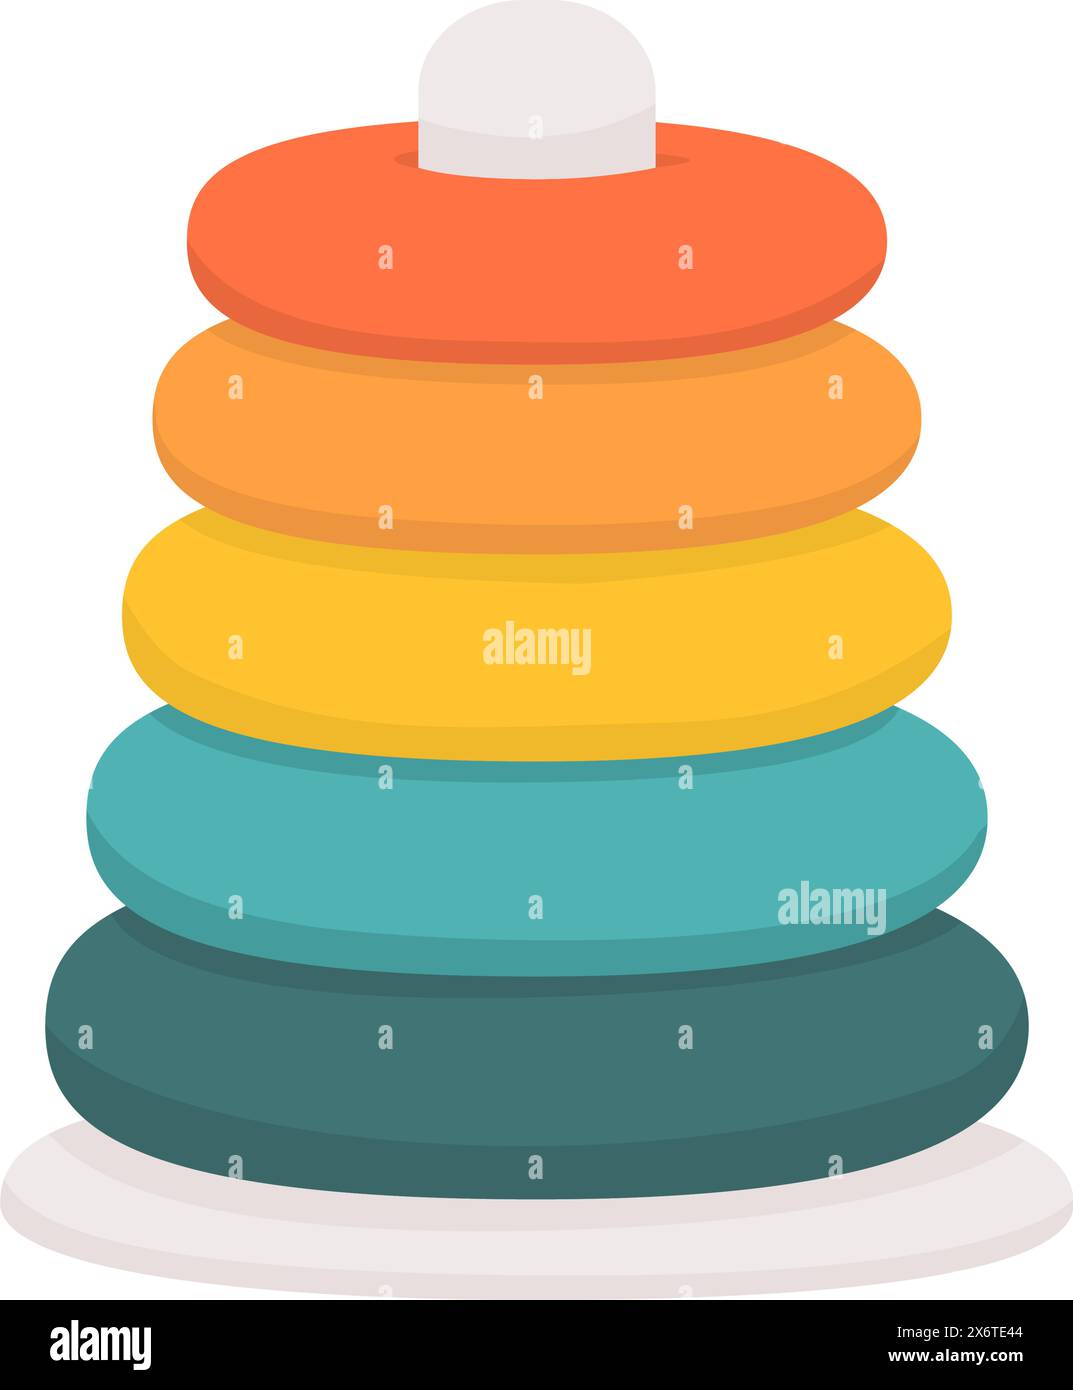 Rainbow stacking toy for babies, play and learn concept Stock Vector